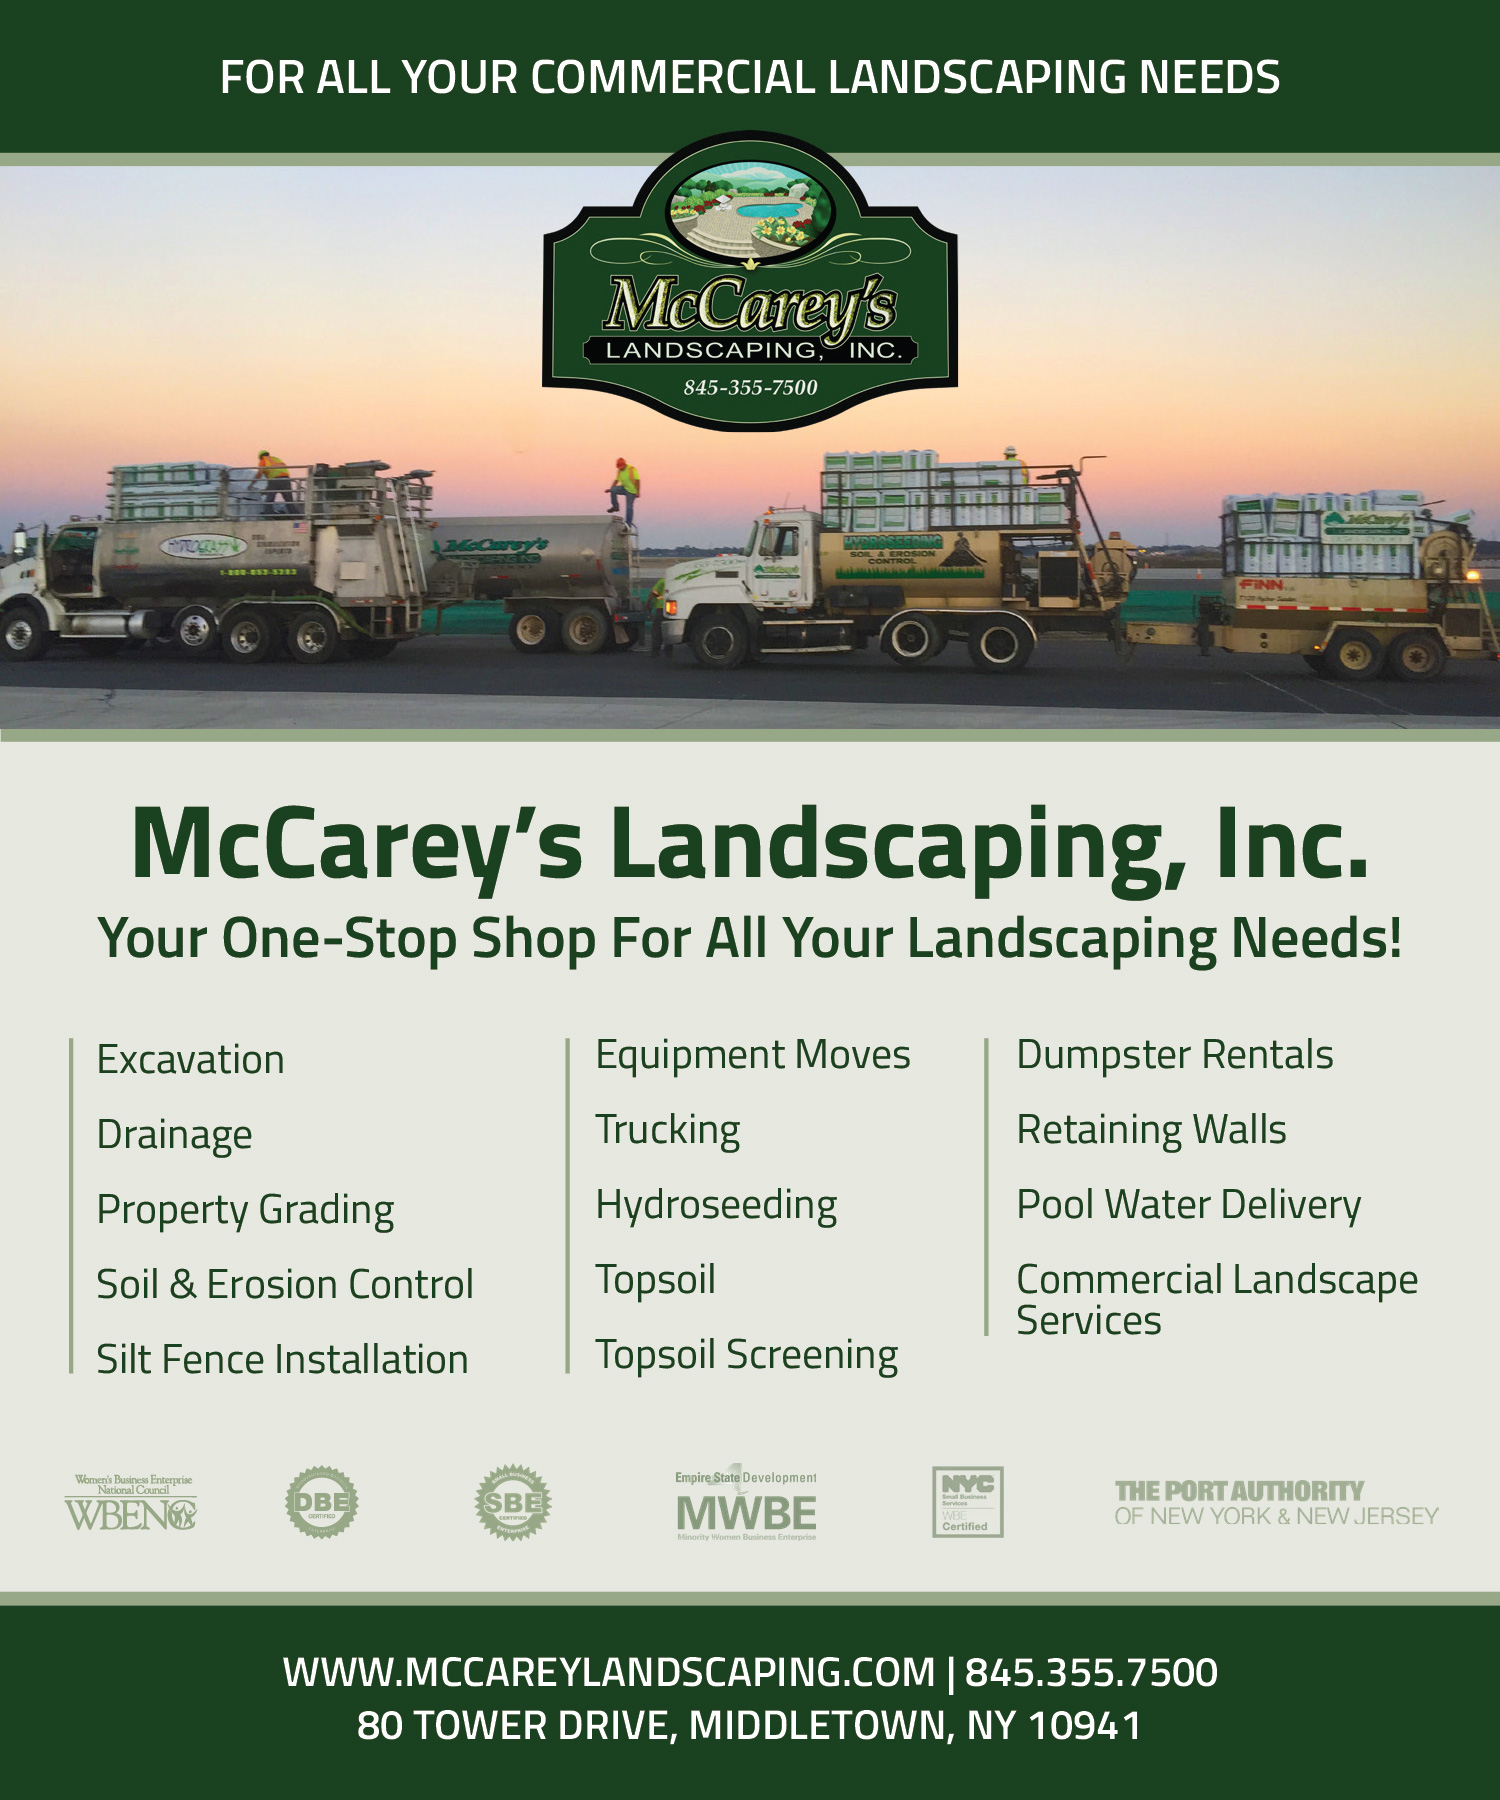 McCarey's Landscaping, Inc., your one-stop shop for all your landscaping needs! Services include excavation, drainage, property grading, soil and erosion control, silt fence installation, equipment moves, trucking, hydroseeding, topsoil/topsoil screening, dumpster rentals, retaining walls, pool water delivery, and commercial landscaping services.